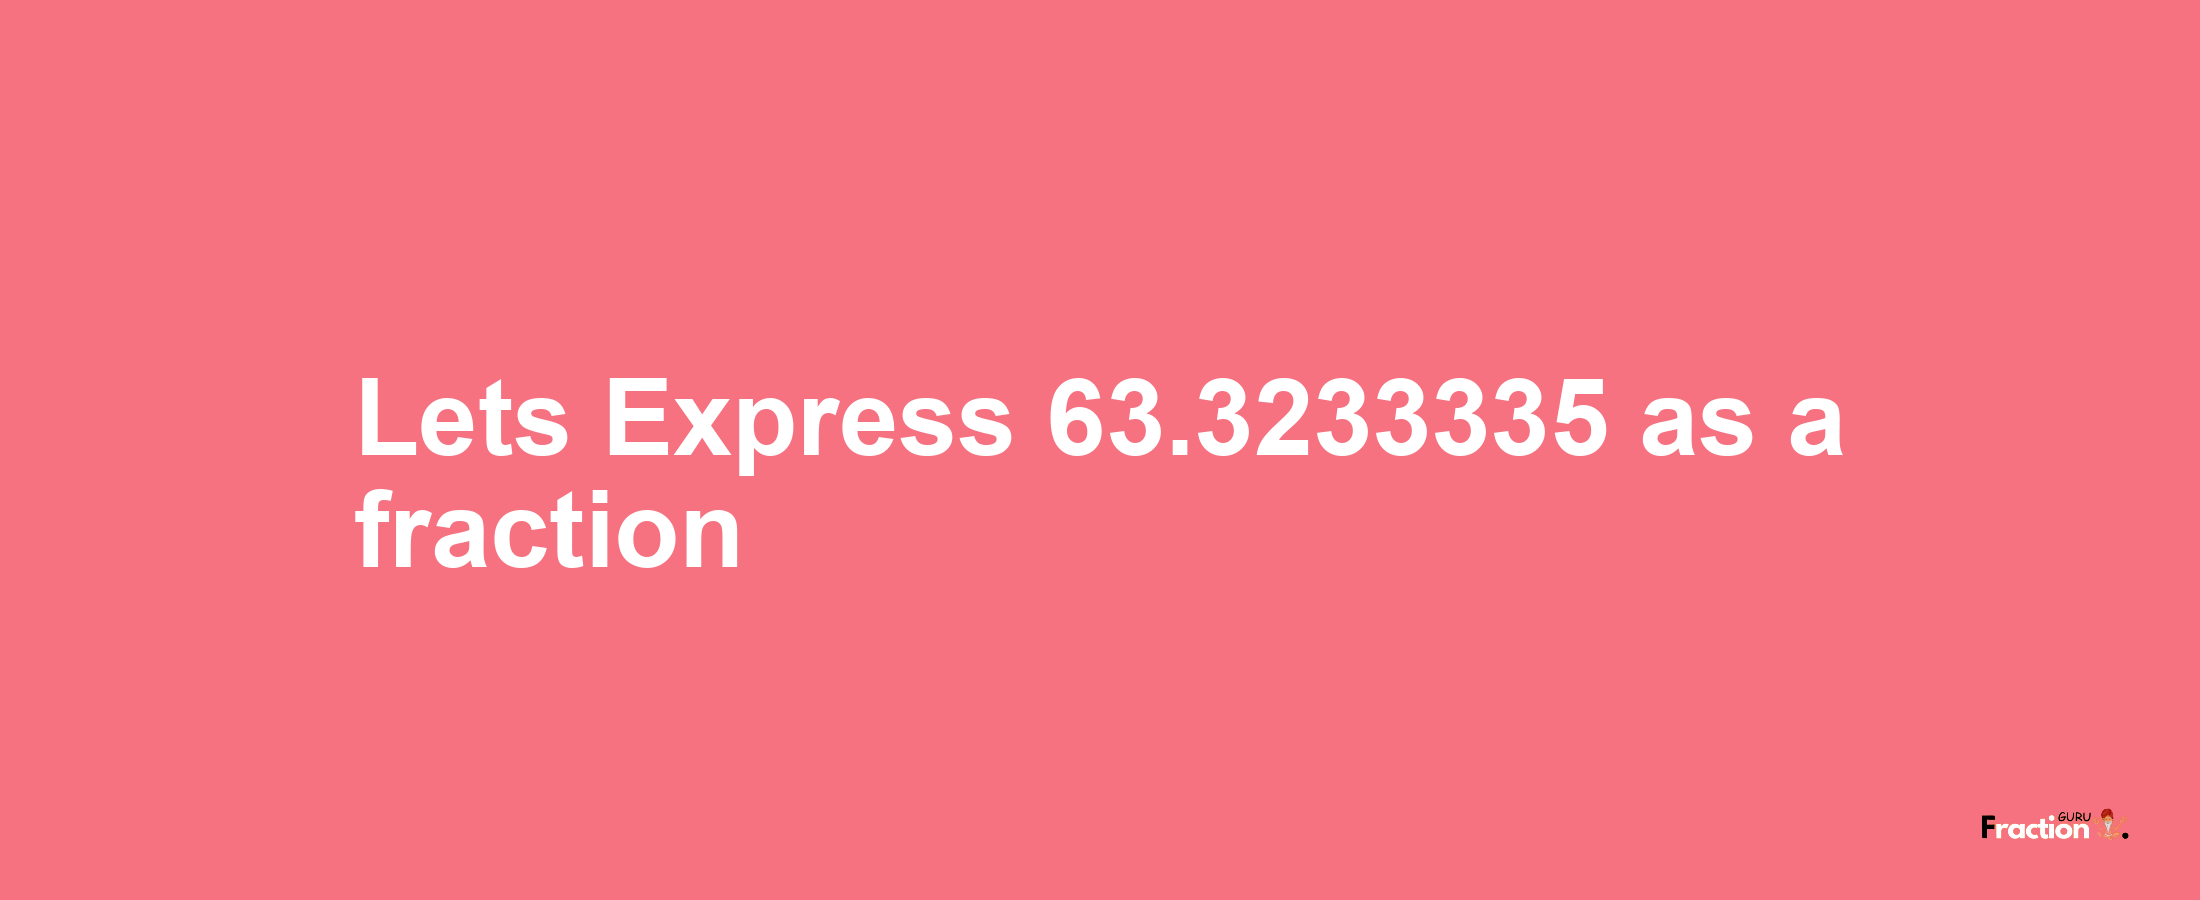 Lets Express 63.3233335 as afraction